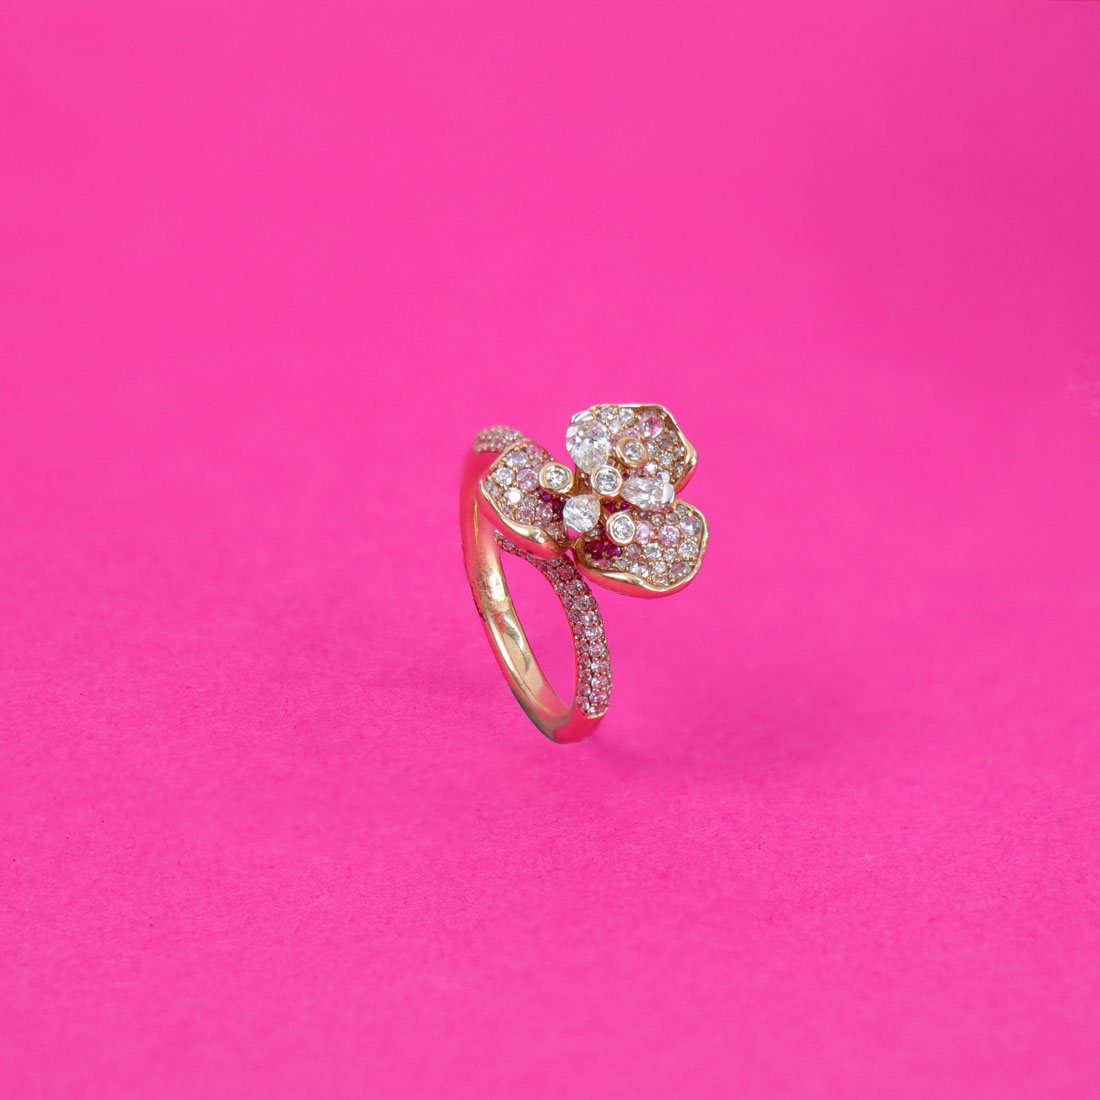 0.55 CTTW Diamond Halo Floral Ring in White Gold | New York Jewelers Chicago